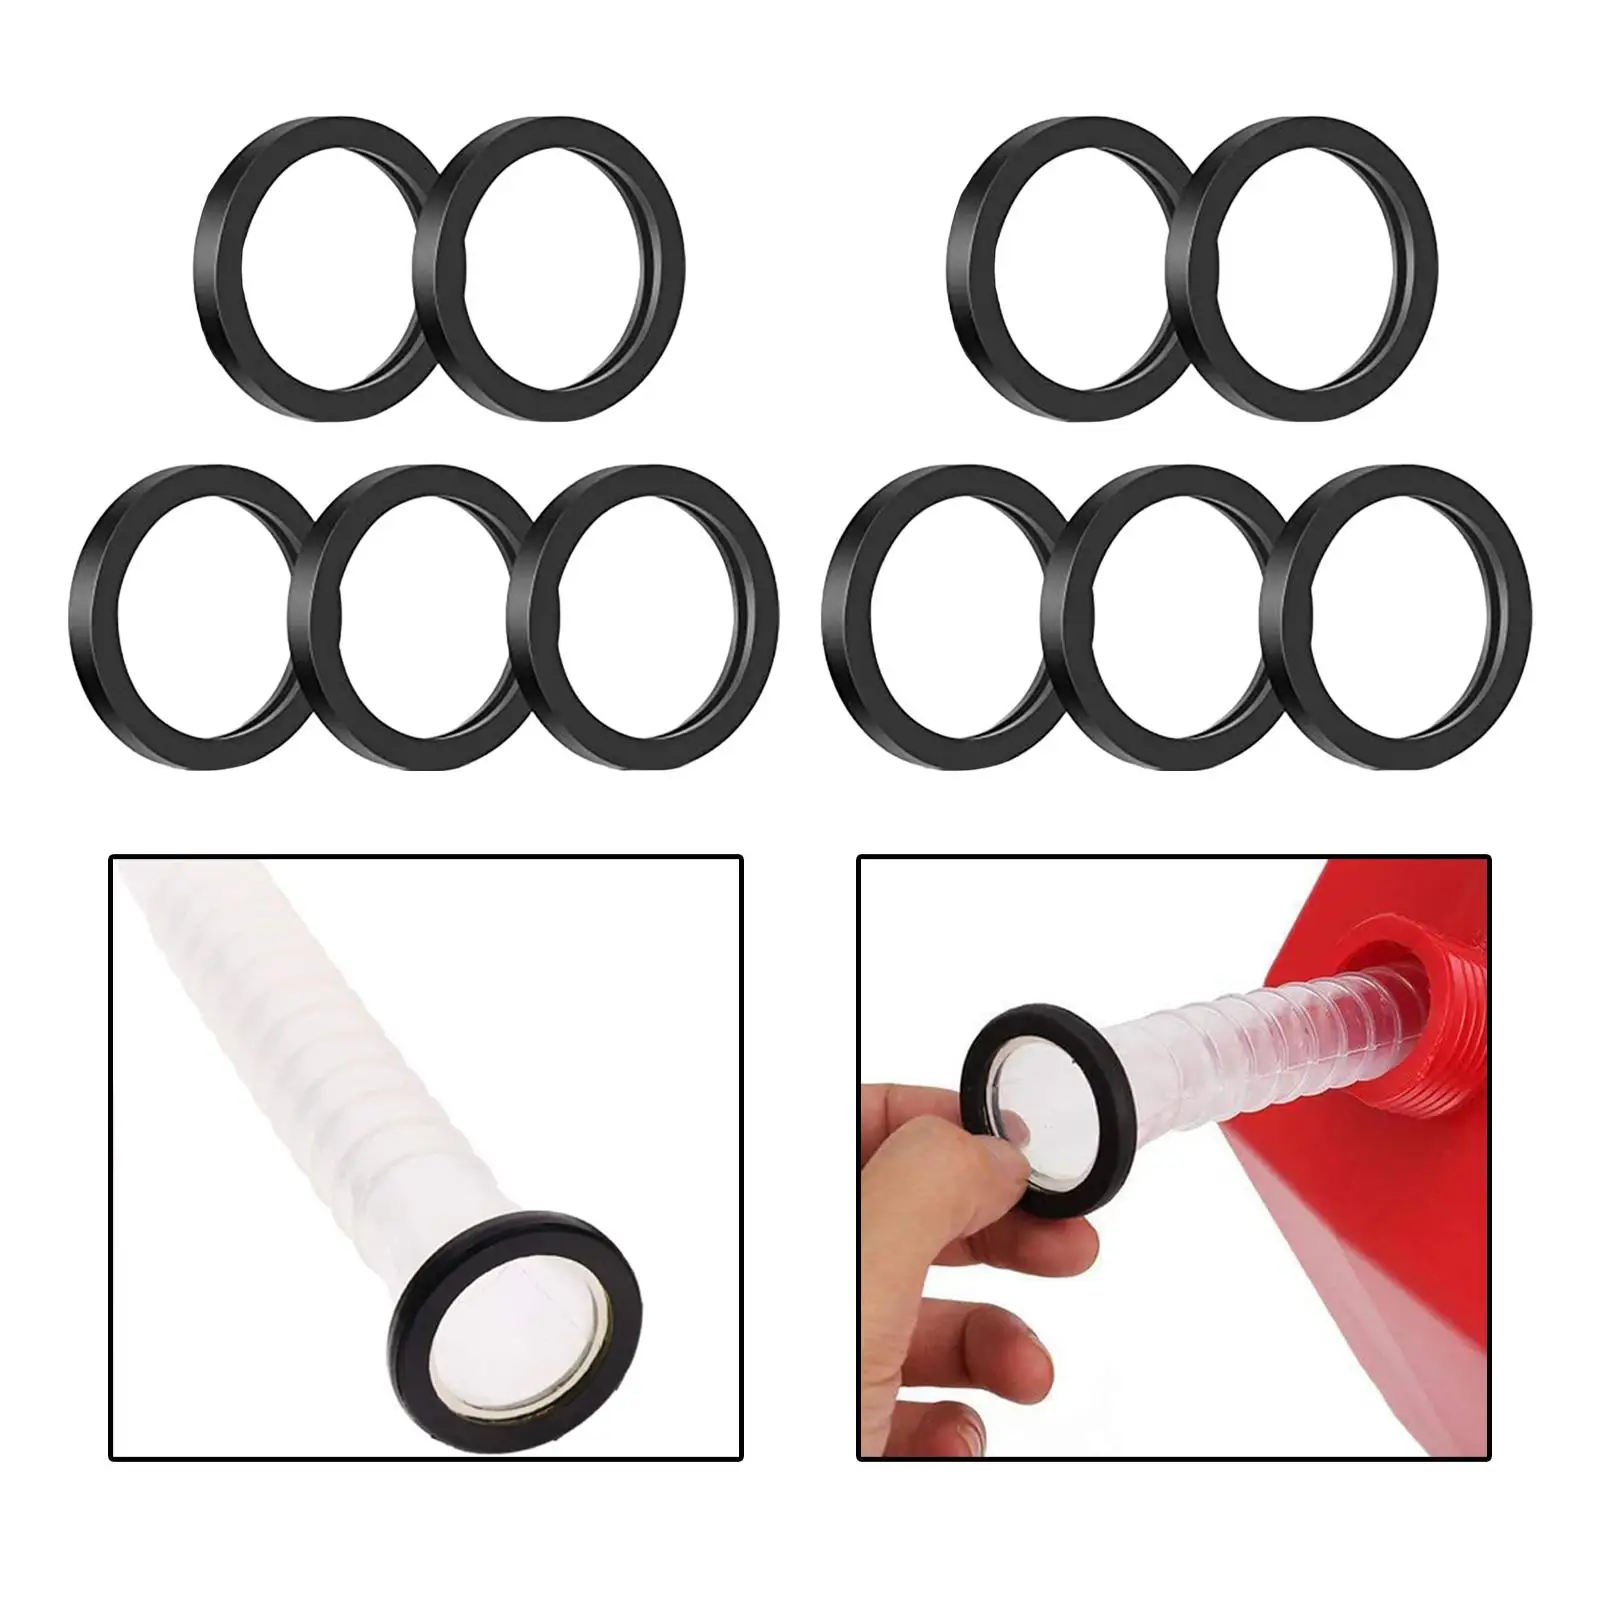 10x Gas Fuel Can Spout Gaskets Fuel Tank Nozzle Seals 1.2inch Dia. Universal Replacement Fuel Can Gaskets Round